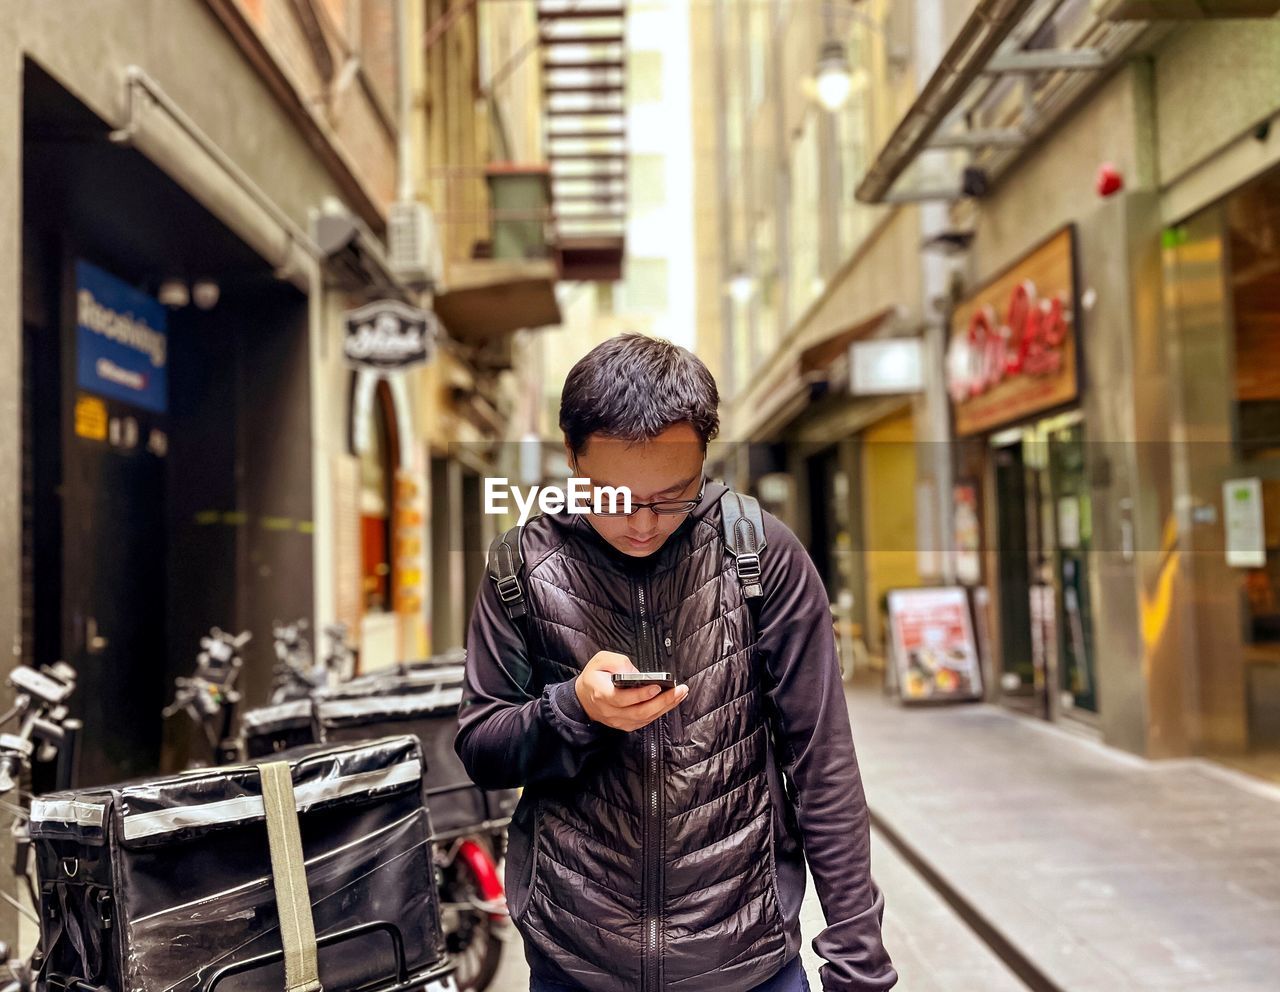 Portrait of young asian man using mobile phone in alley against buildings in the city.